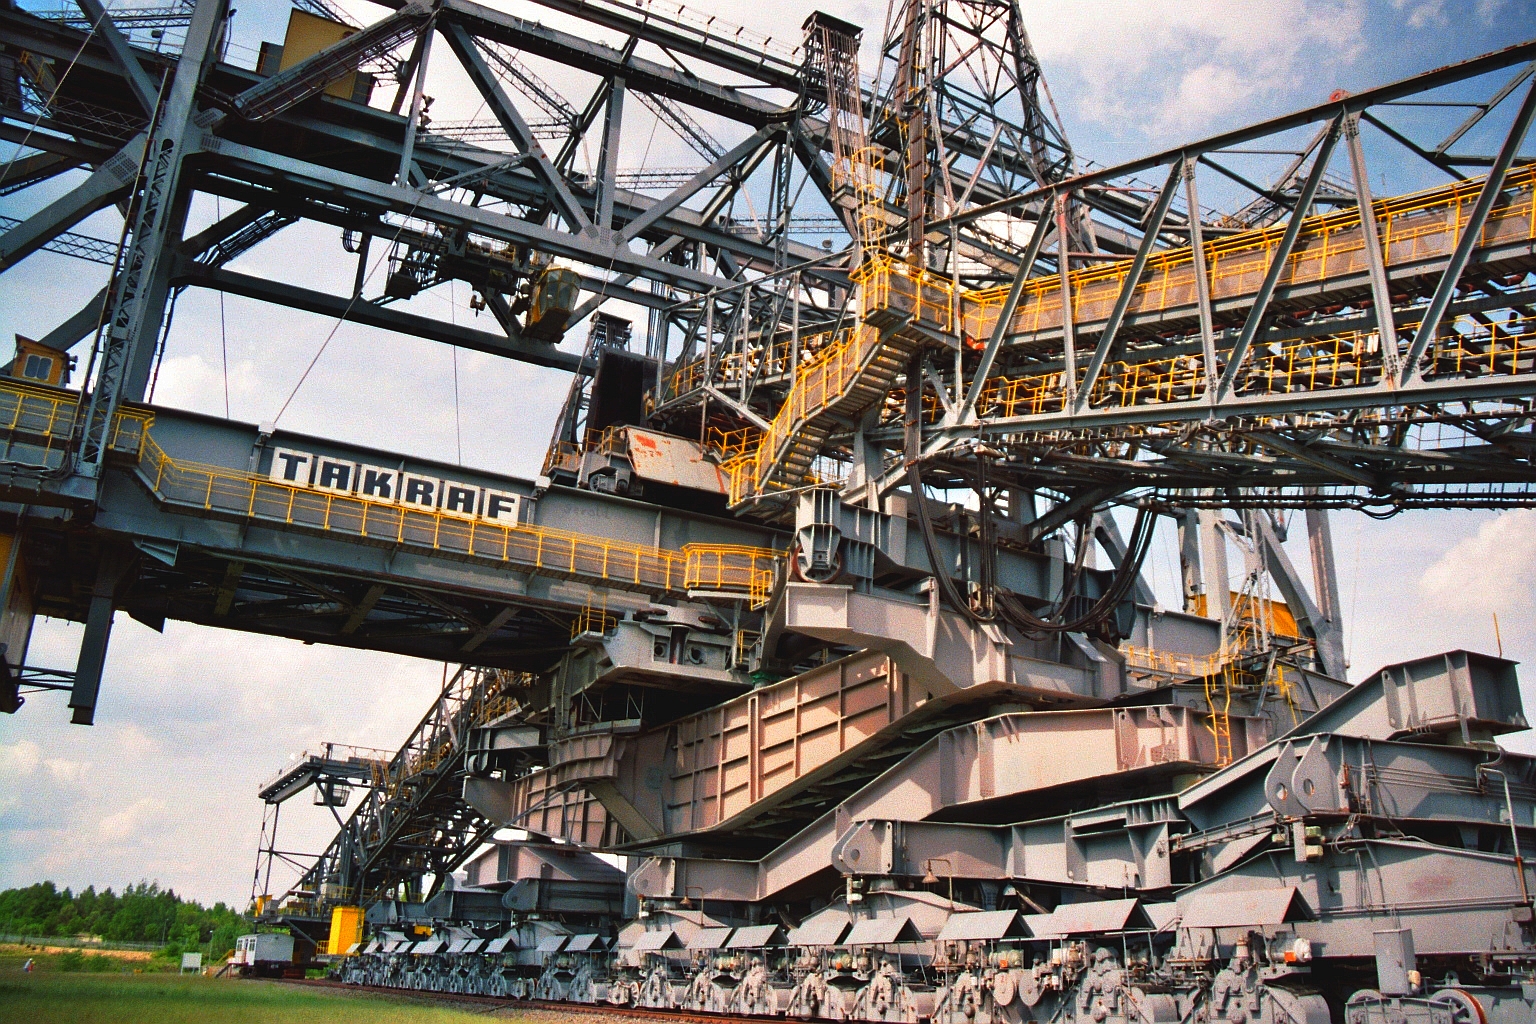 This Is The Largest Movable Machine In The World